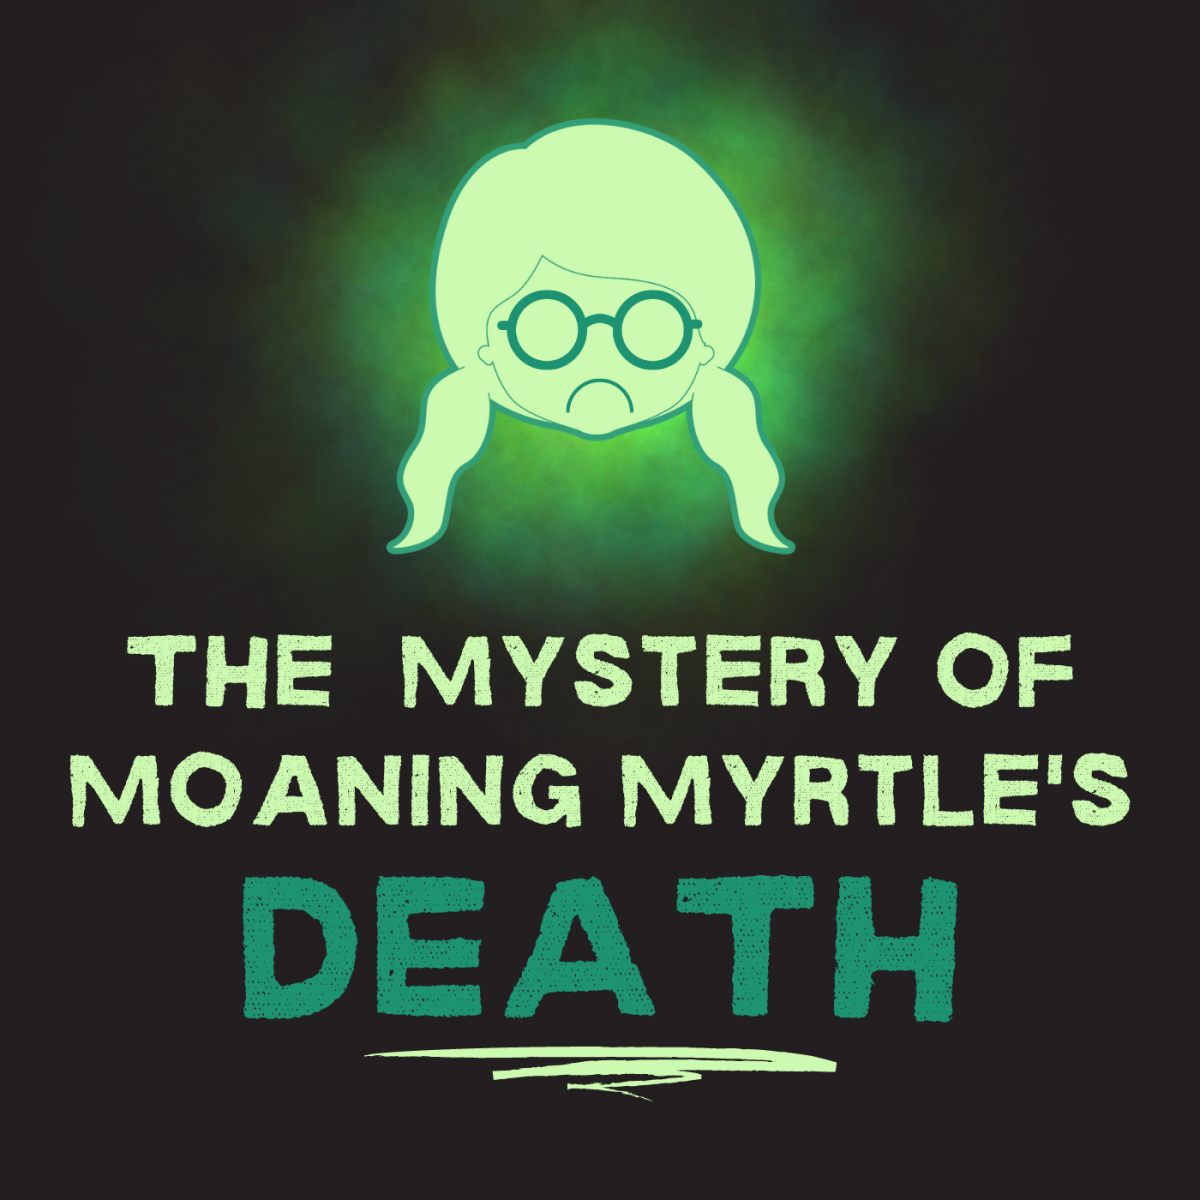 Harry Potter Theory: The Moaning Myrtle Mystery